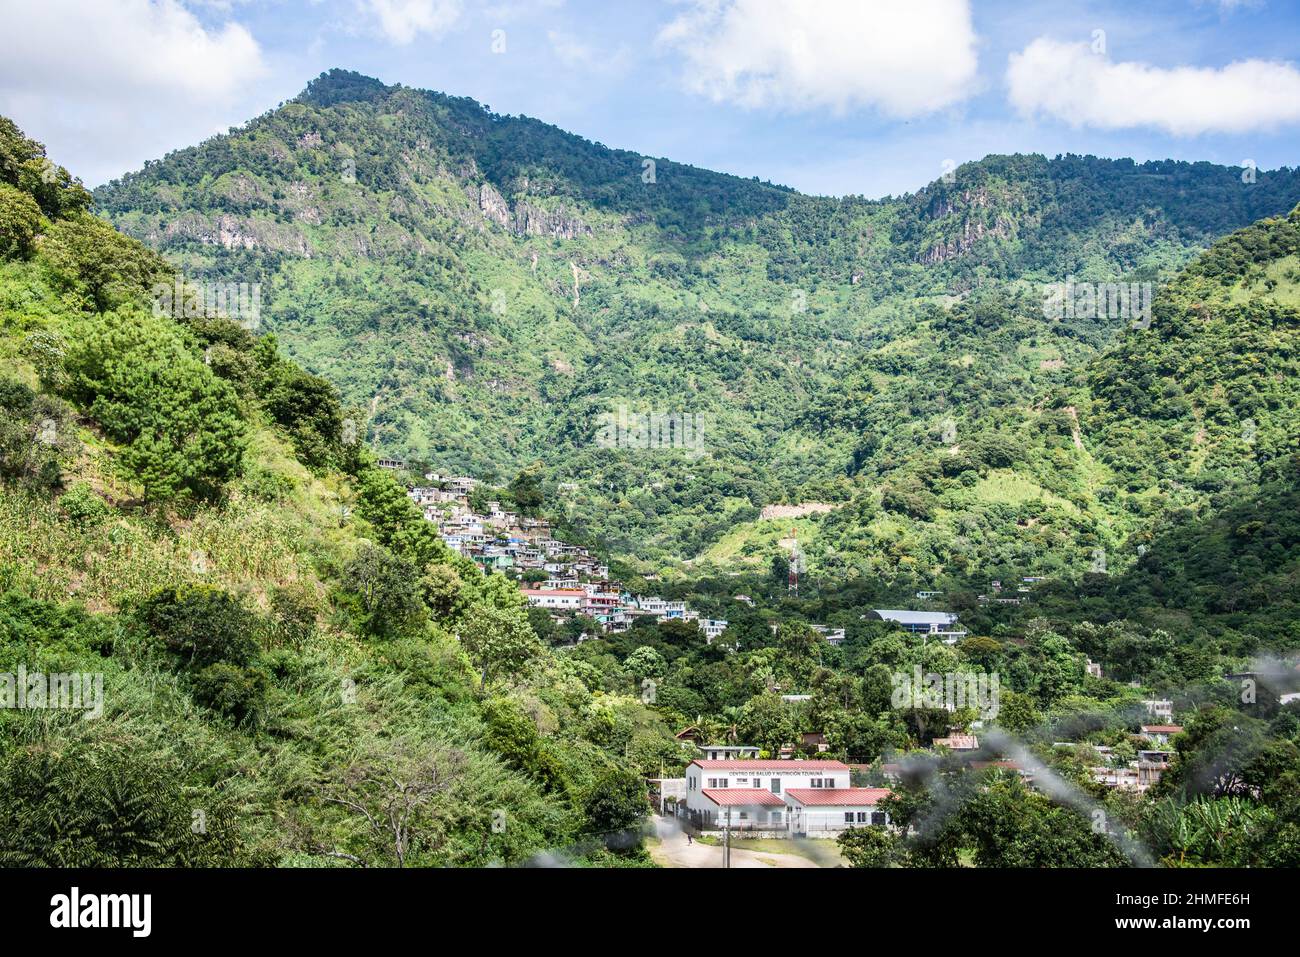 View of the surrounding villages and the beautiful Lake Atitlan in the Guatemalan highlands, Solola, Guatemala Stock Photo